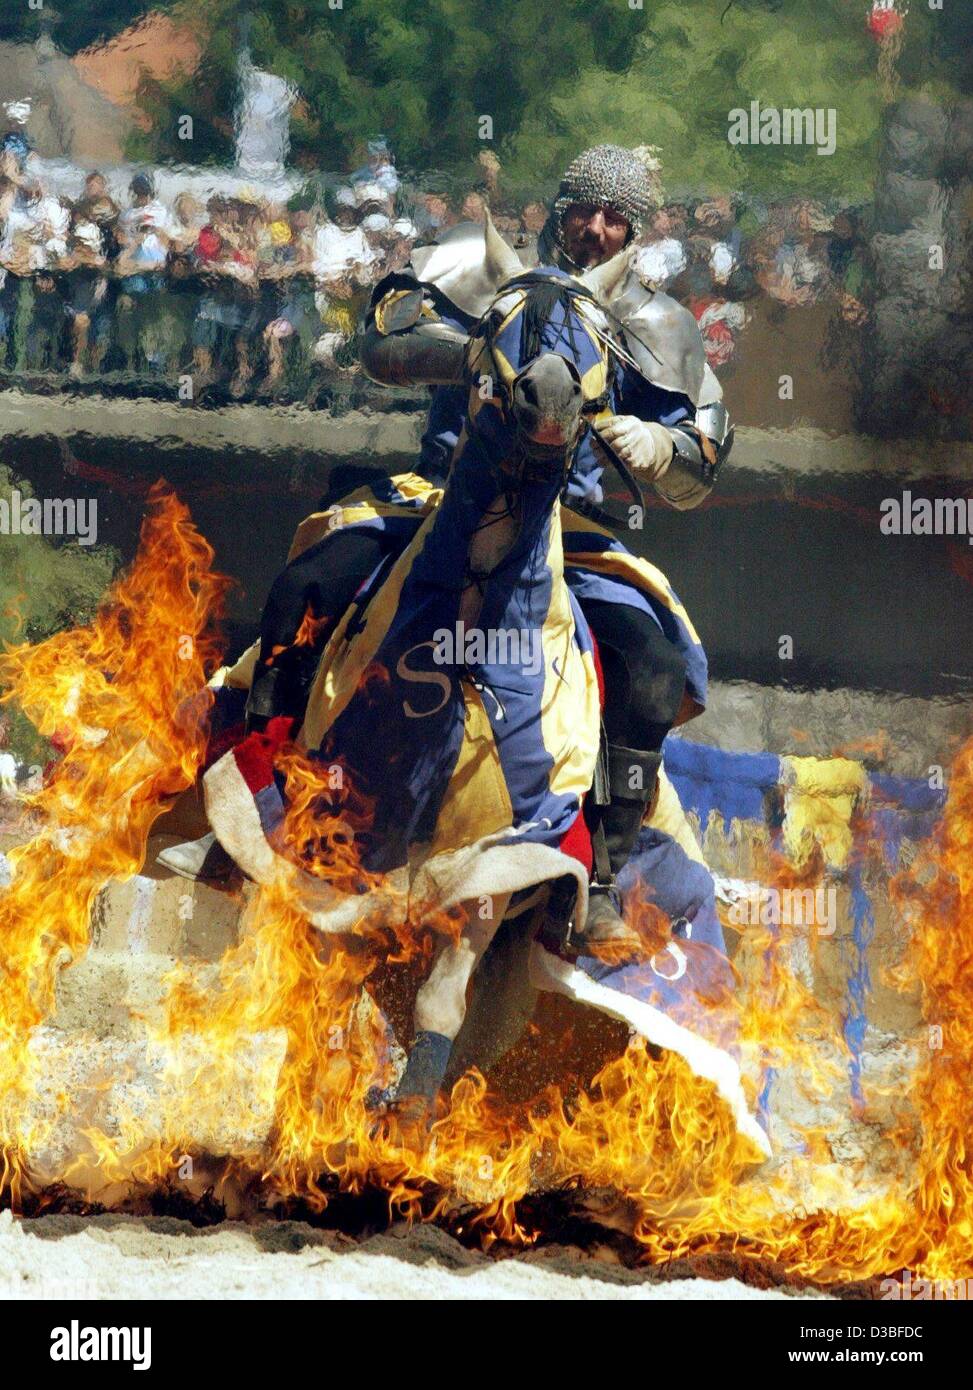 (dpa) - An armoured knight on his horse races through a wall of fire during the mediaeval  'Maximilian Ritterspiele' (Maximilian knight joust) in Horb, Germany, 21 June 2003. The joust dates back to the visit of the German emperor in the town of Horb in 1498. The festival spectacle reminds of this o Stock Photo